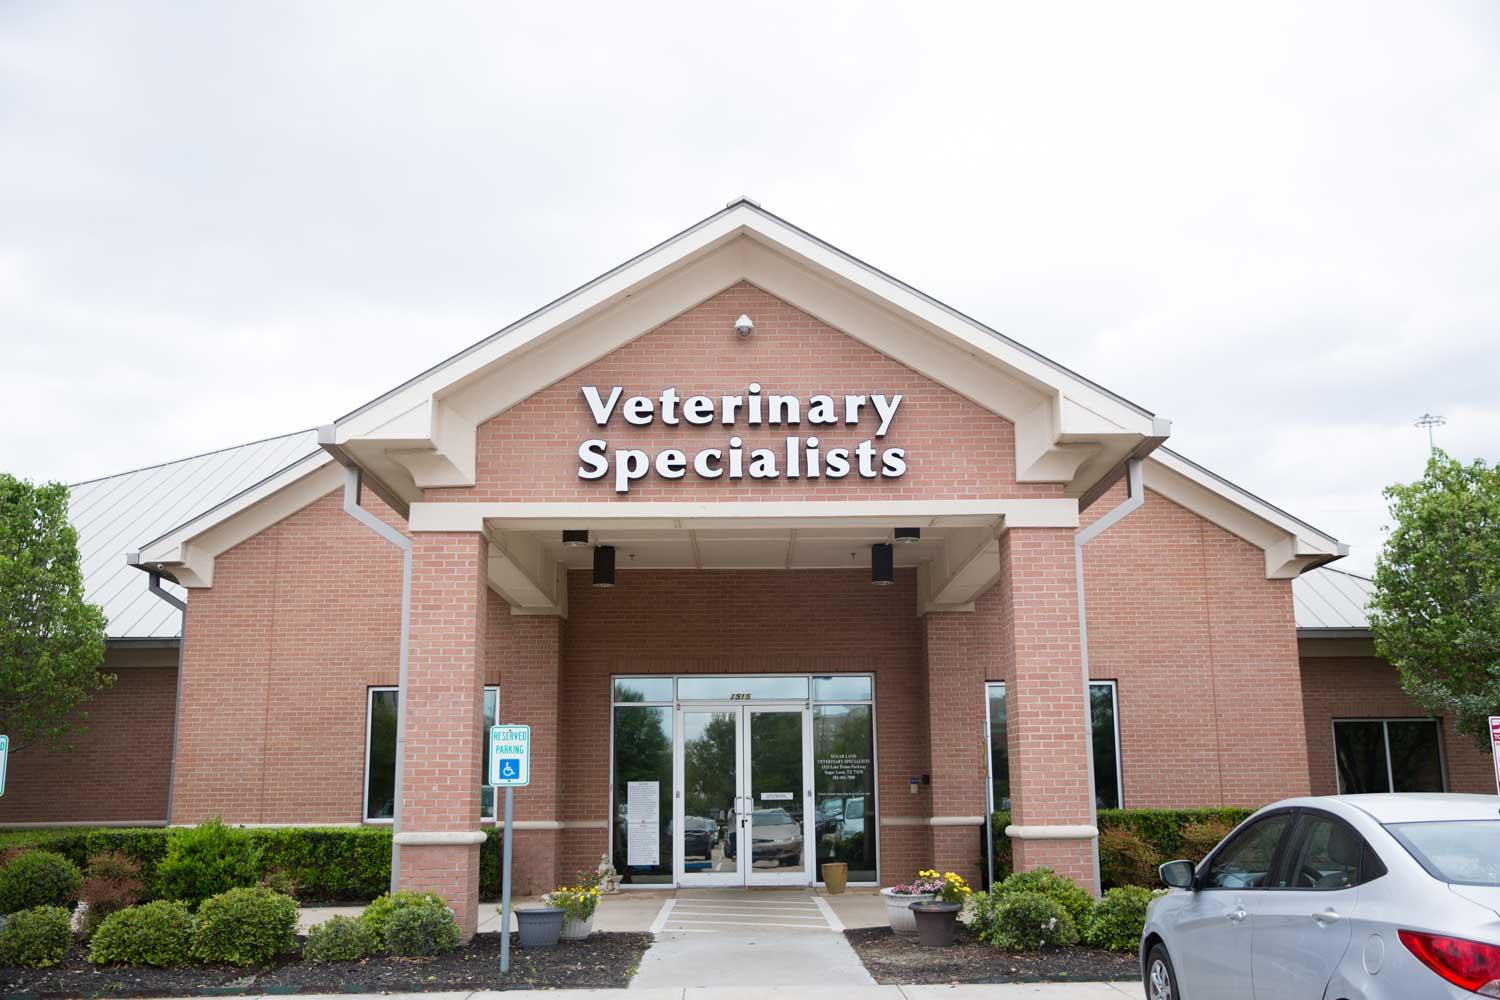 Sugar Land Veterinary Specialists & 24 Hour Emergency Care Photo